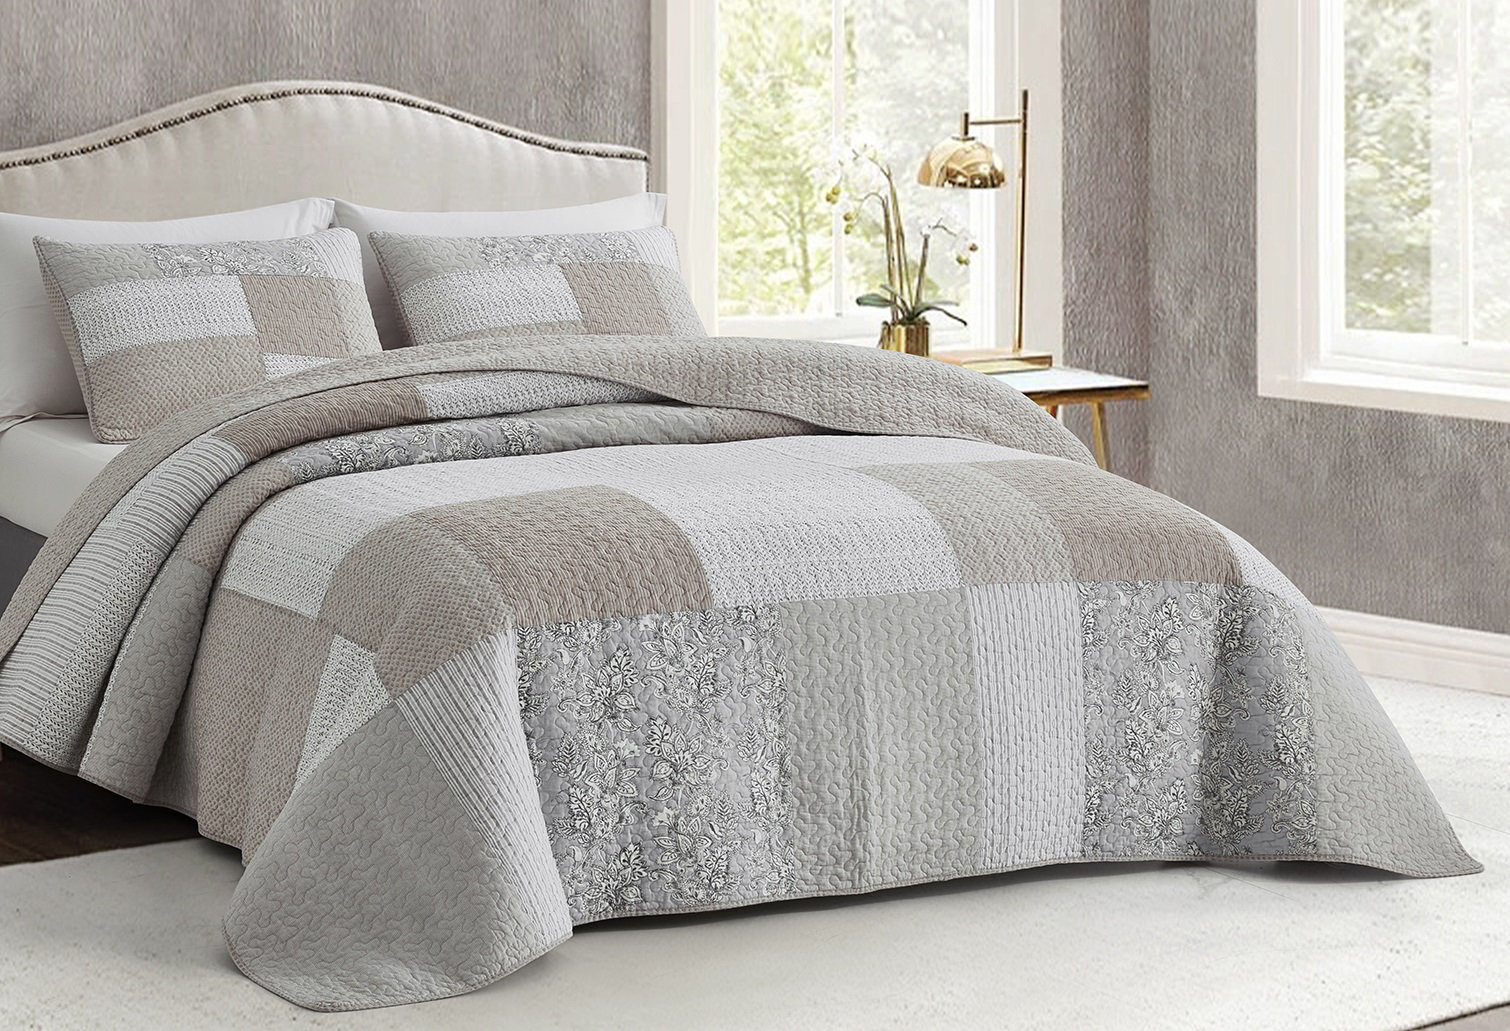 Quilt Queen,Queen Size Bed Quilt Set,Cotton Patchwork Plaid Bedspreads for  Queen Size Bed,Gray(Grey)/Black/Tan(Brown)/Off-White Reversible Lightweight